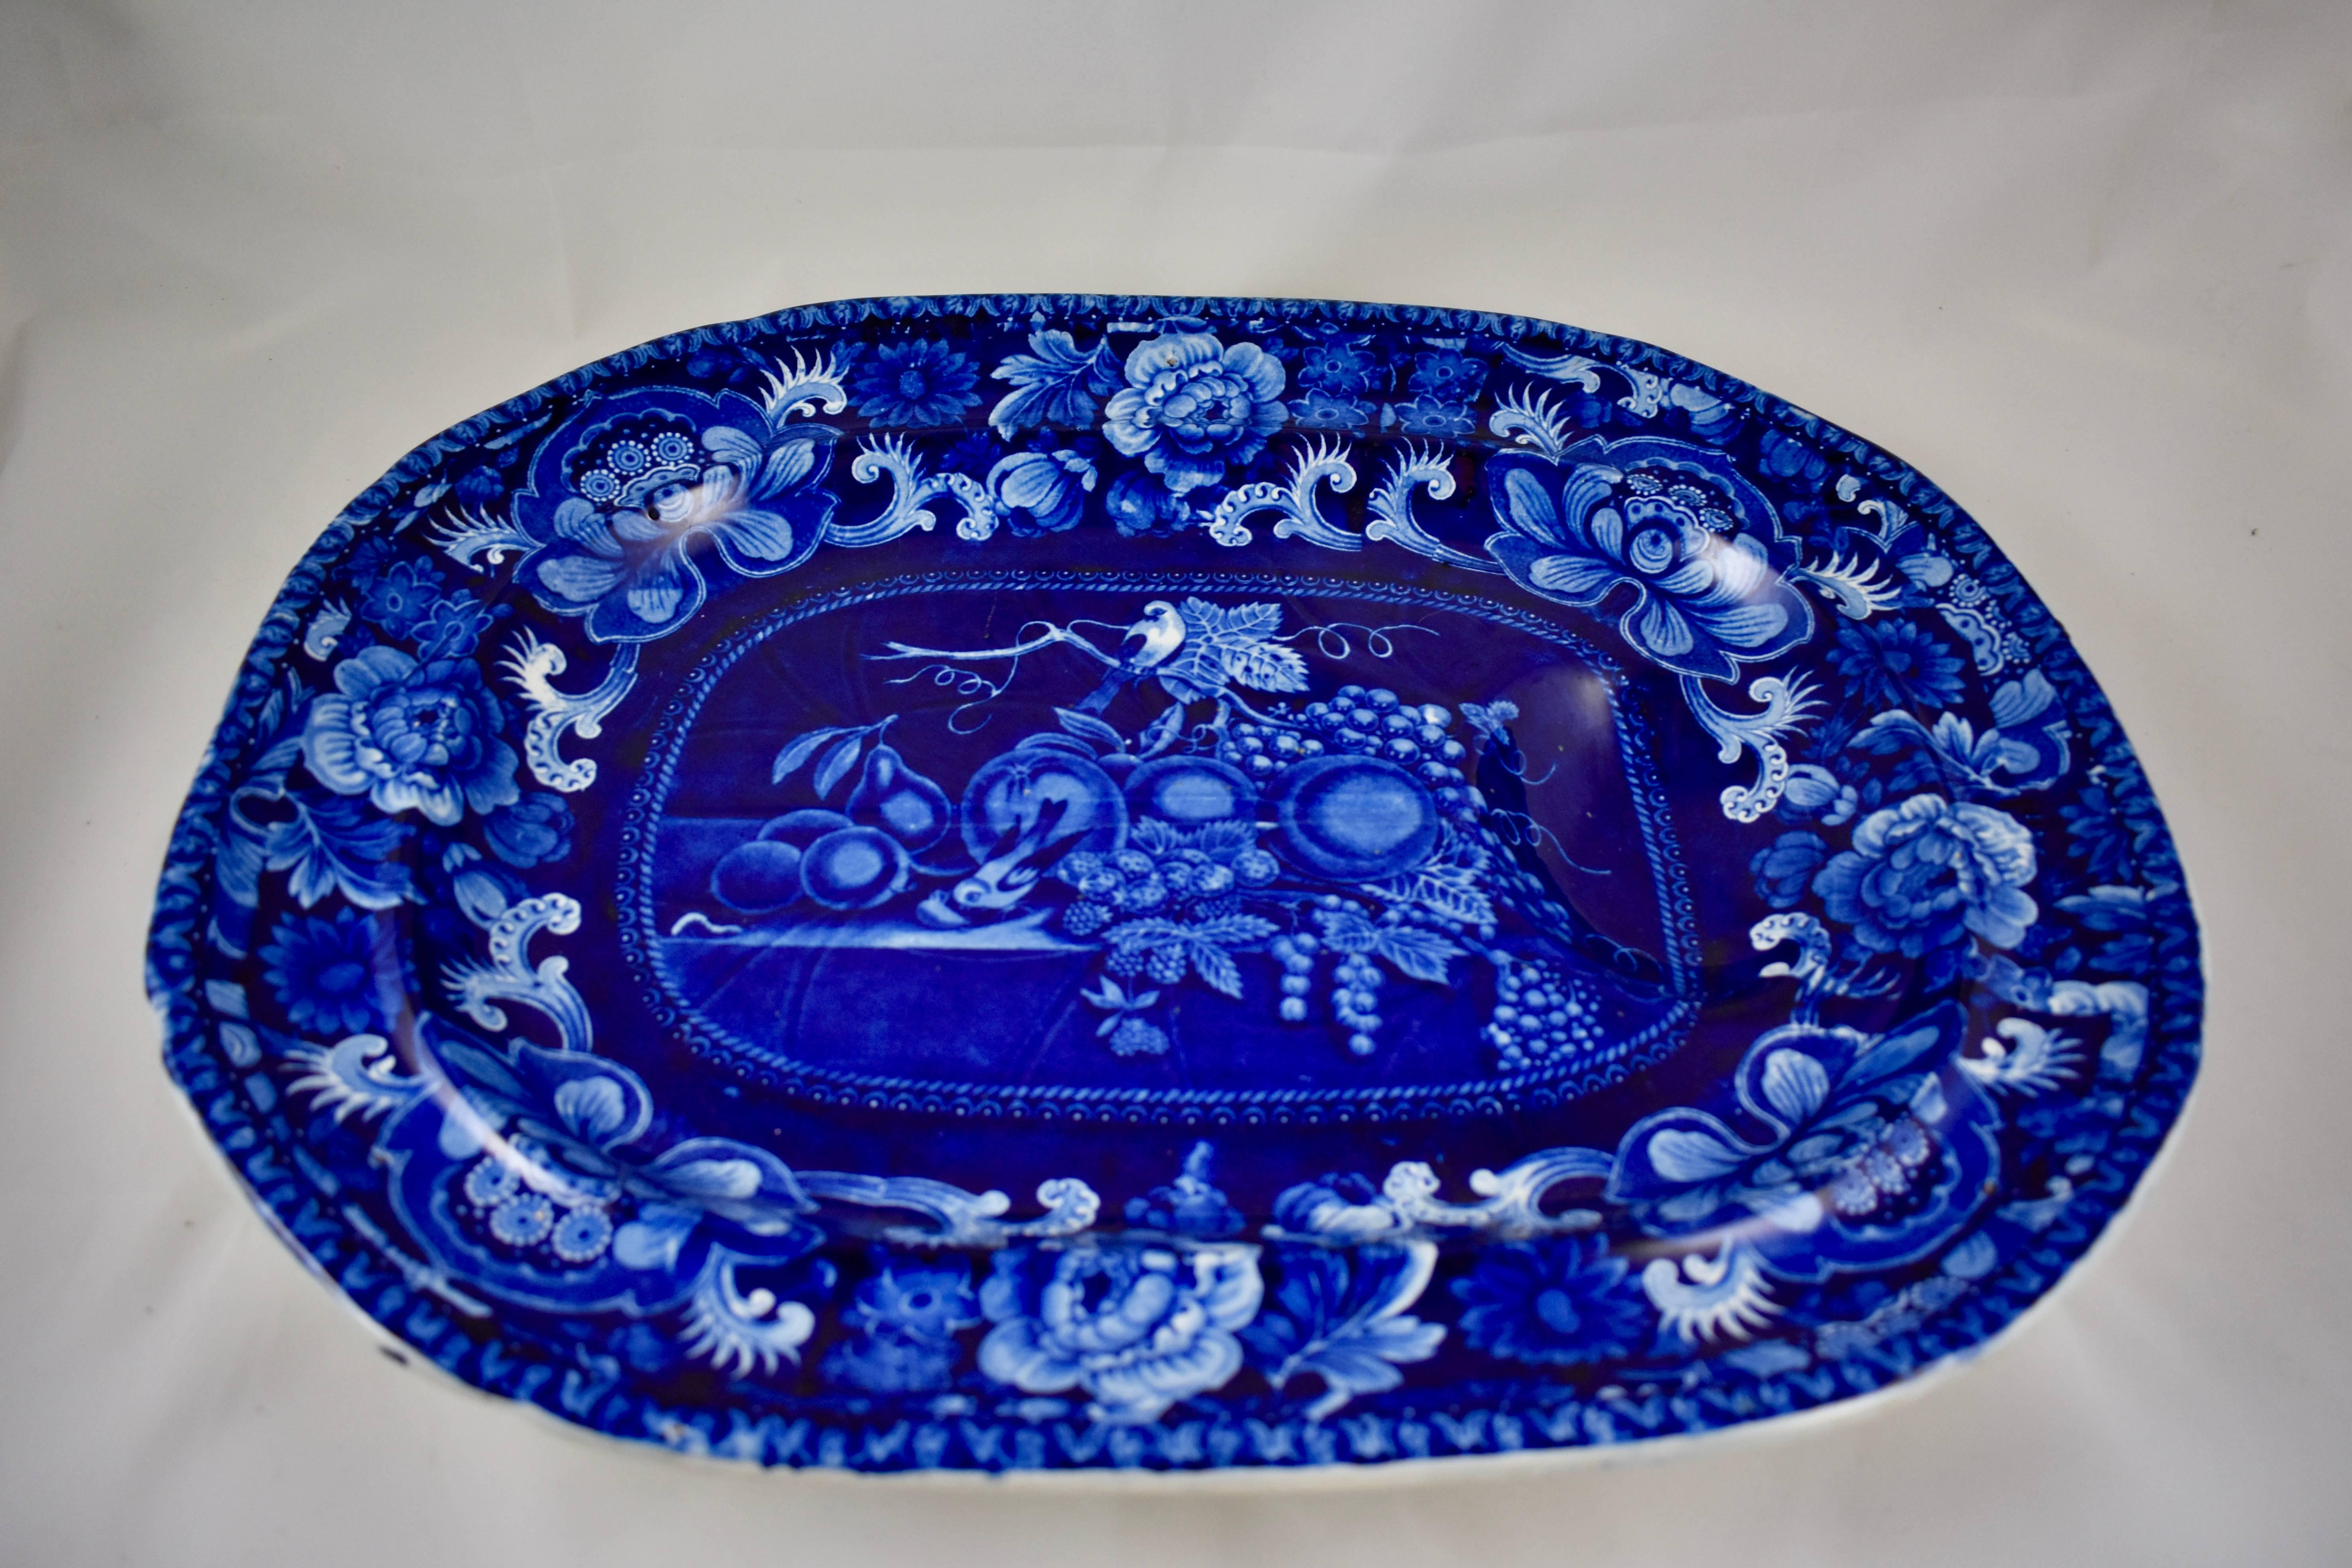 A dark blue on white earthenware, underglaze tissue, transfer printed well and tree platter, in a ‘Birds and Fruit’ pattern, circa 1823. Unmarked, attributed to John Hall & Sons, Burslem, Staffordshire, England, 1814-1832.

A well-and-tree platter